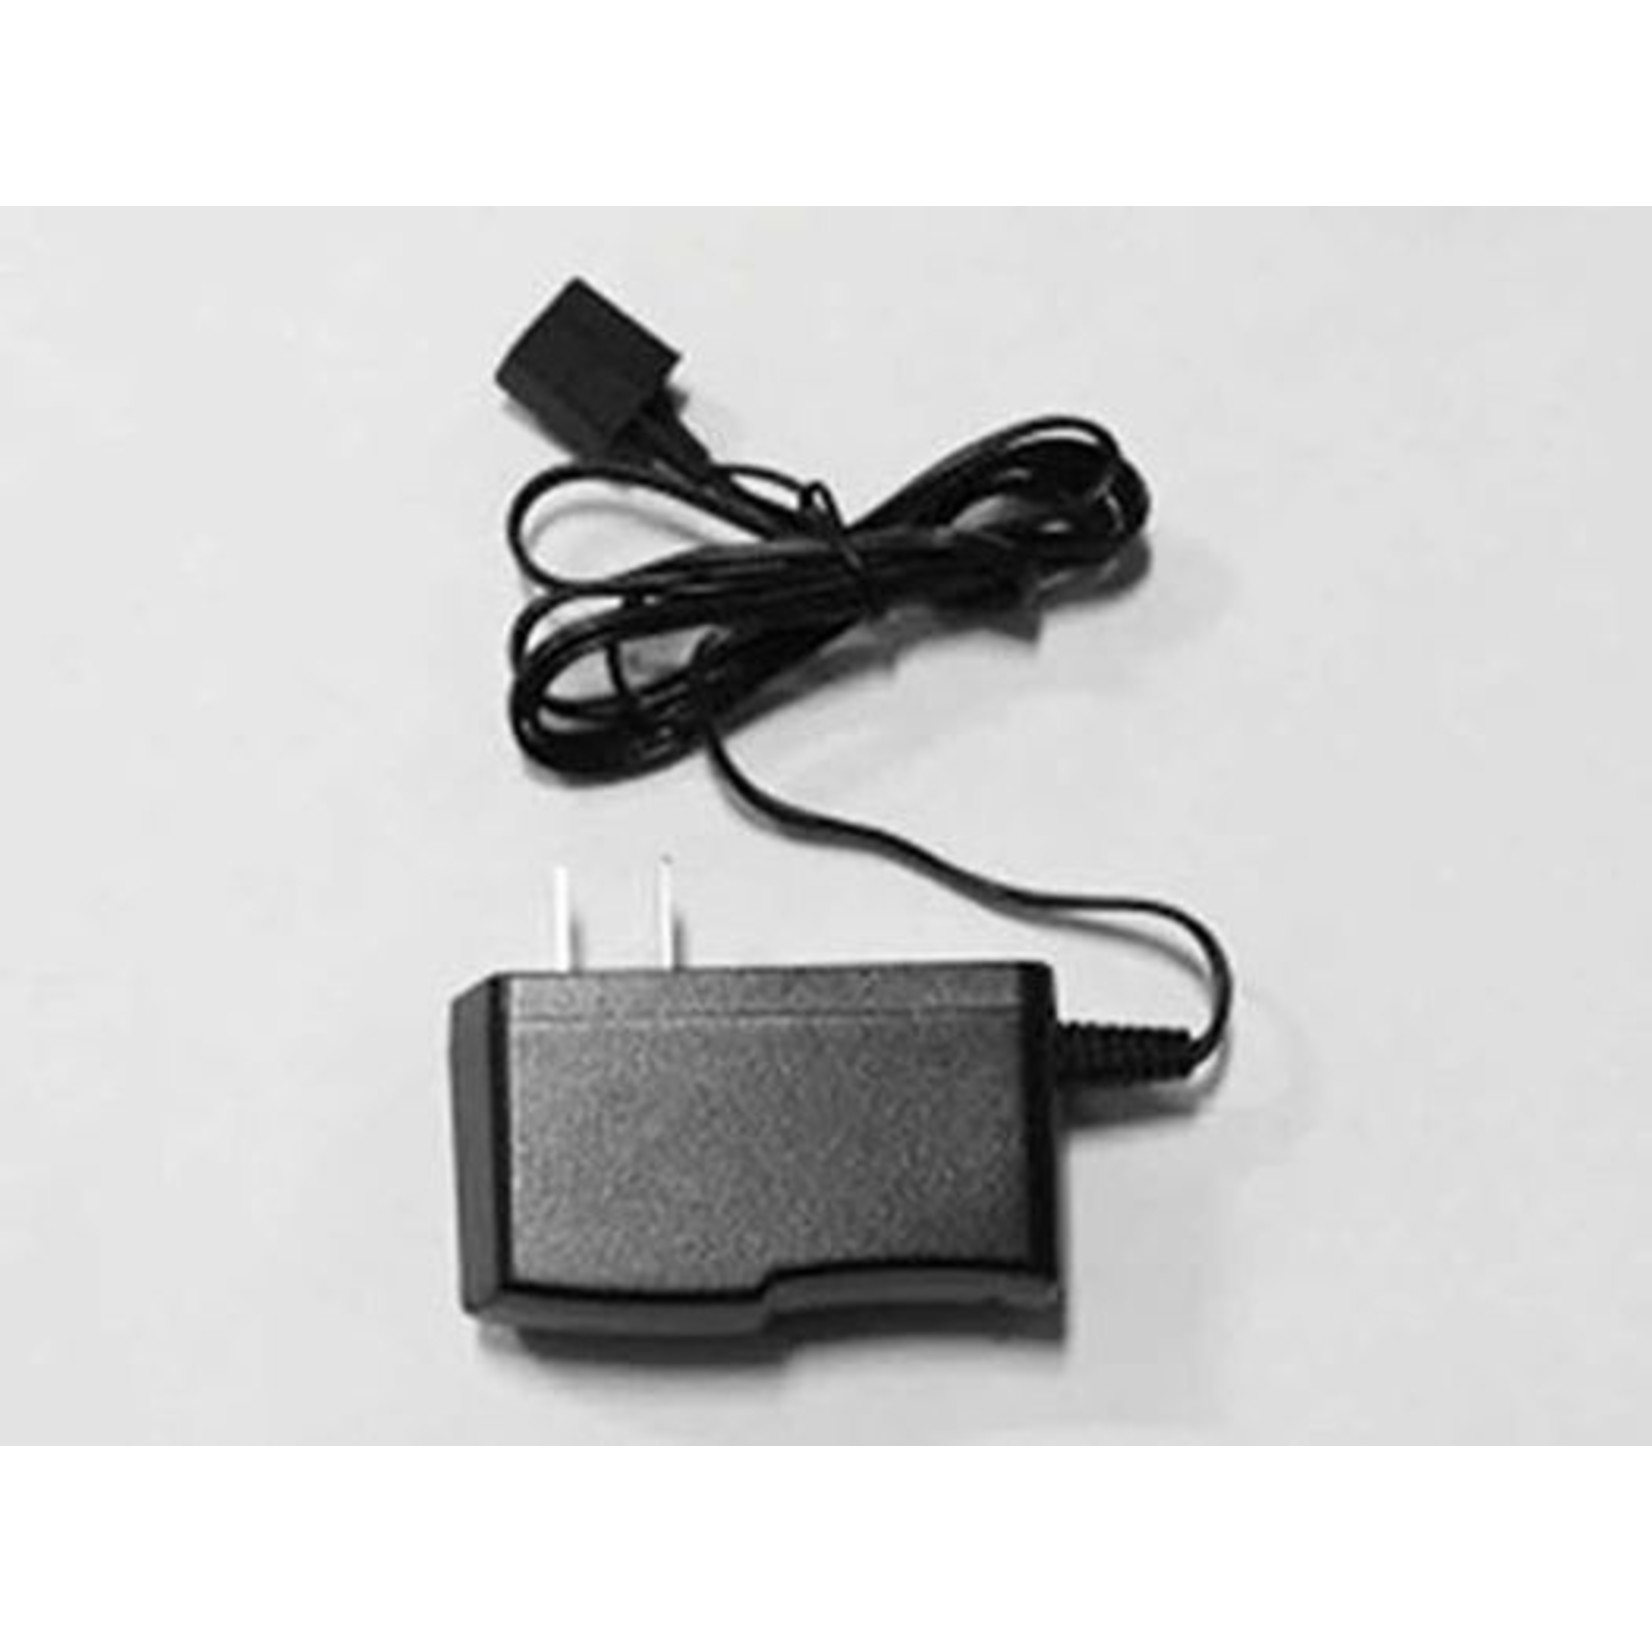 DHK Hobby 7-Cell NiMh Battery Charger (T-Connector)